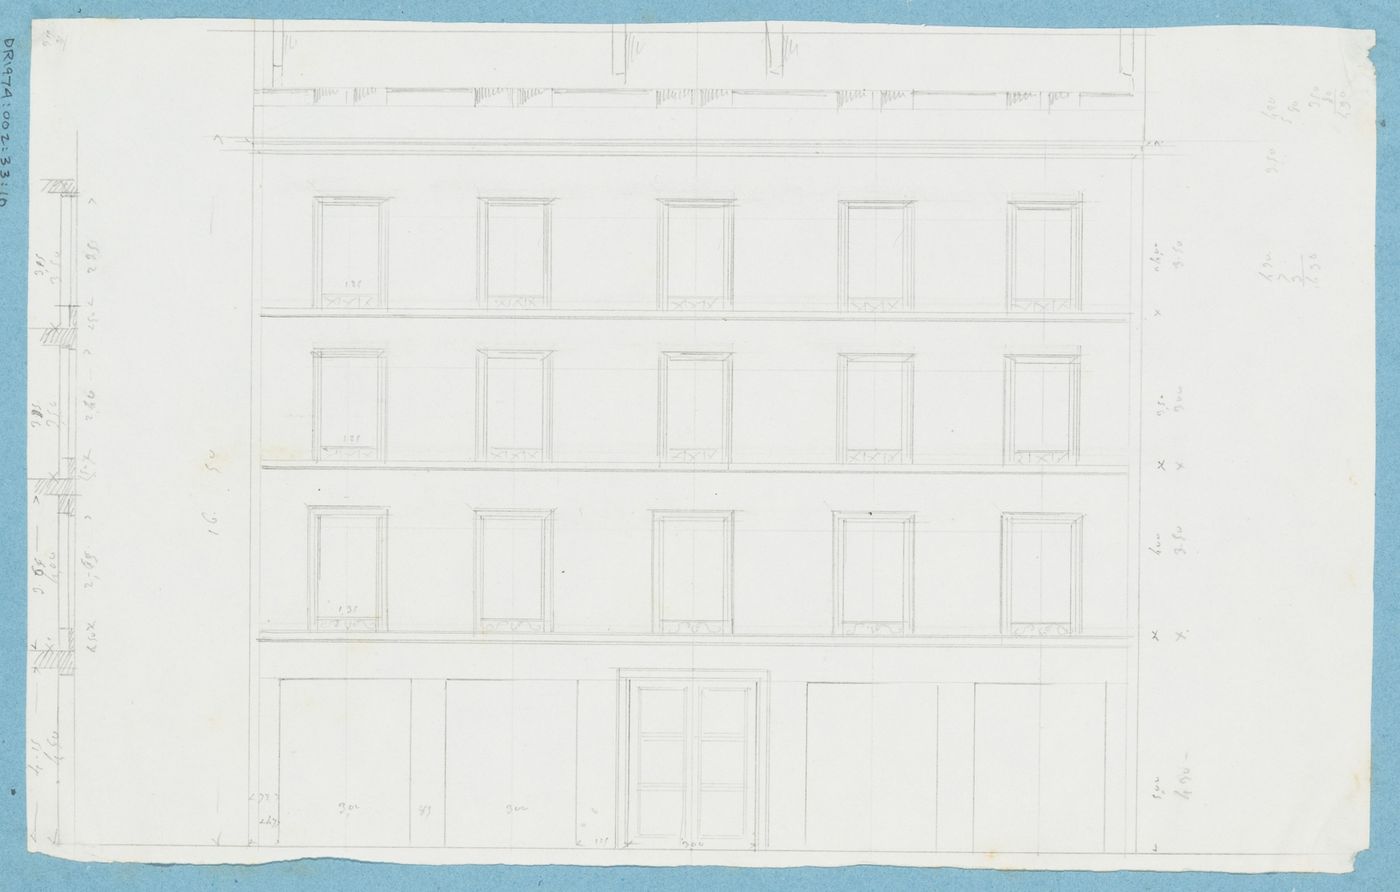 Project for a hôtel for M. Busche: Principal elevation with partial section for a four-storey hôtel